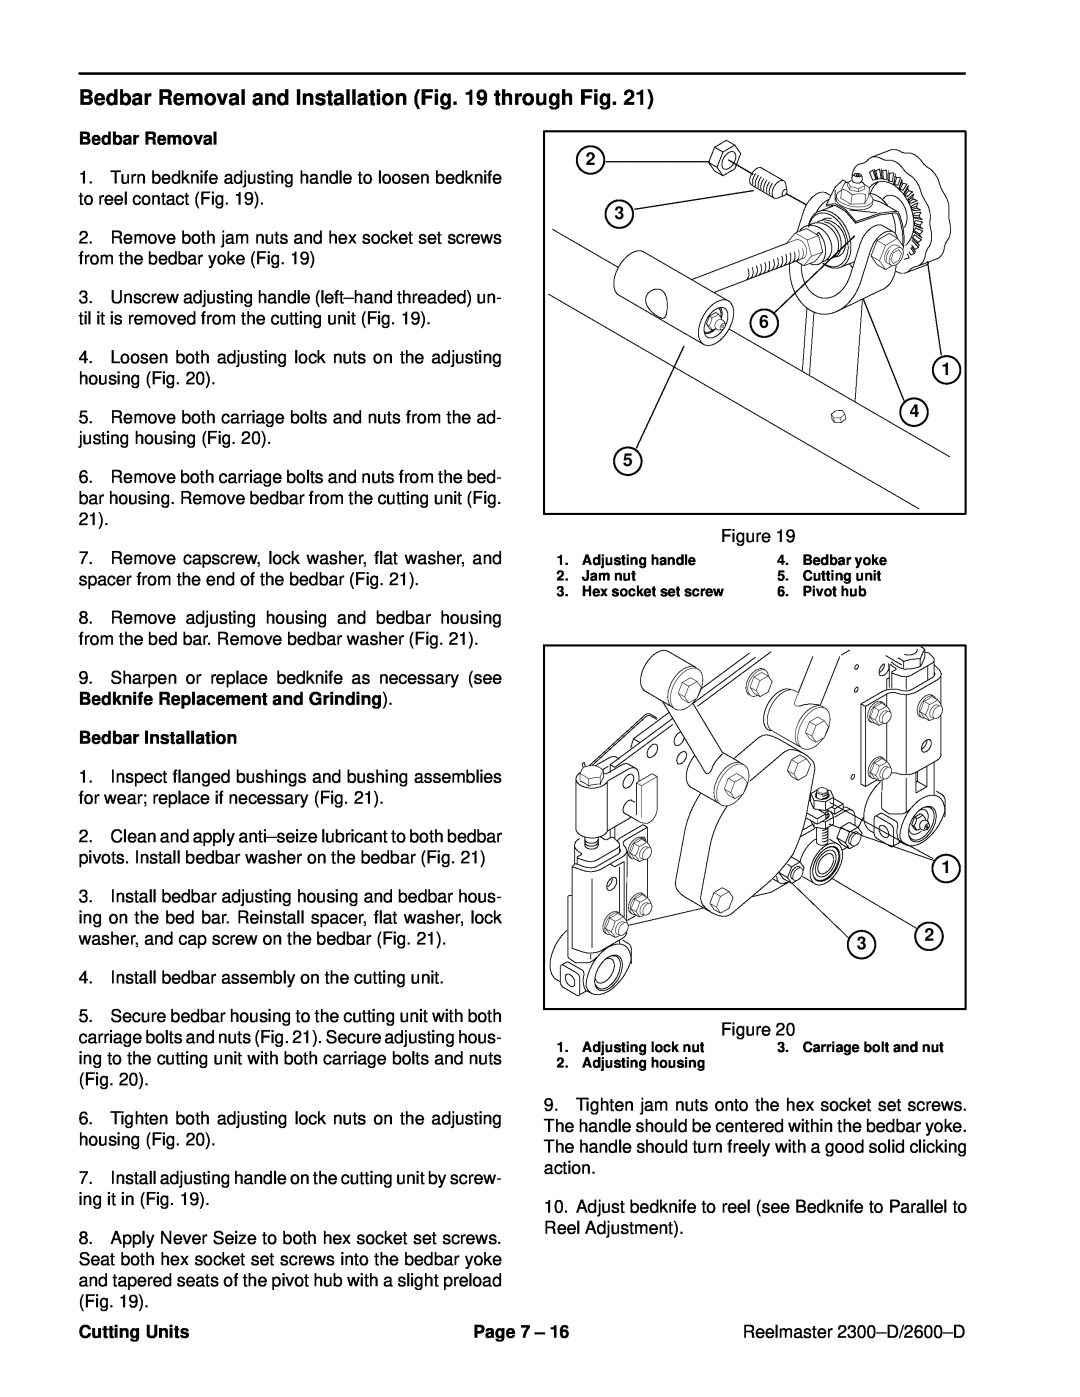 Toro 2300-D, 2600D service manual Bedbar Removal and Installation through Fig, Bedbar Installation, Cutting Units, Page 7 ± 